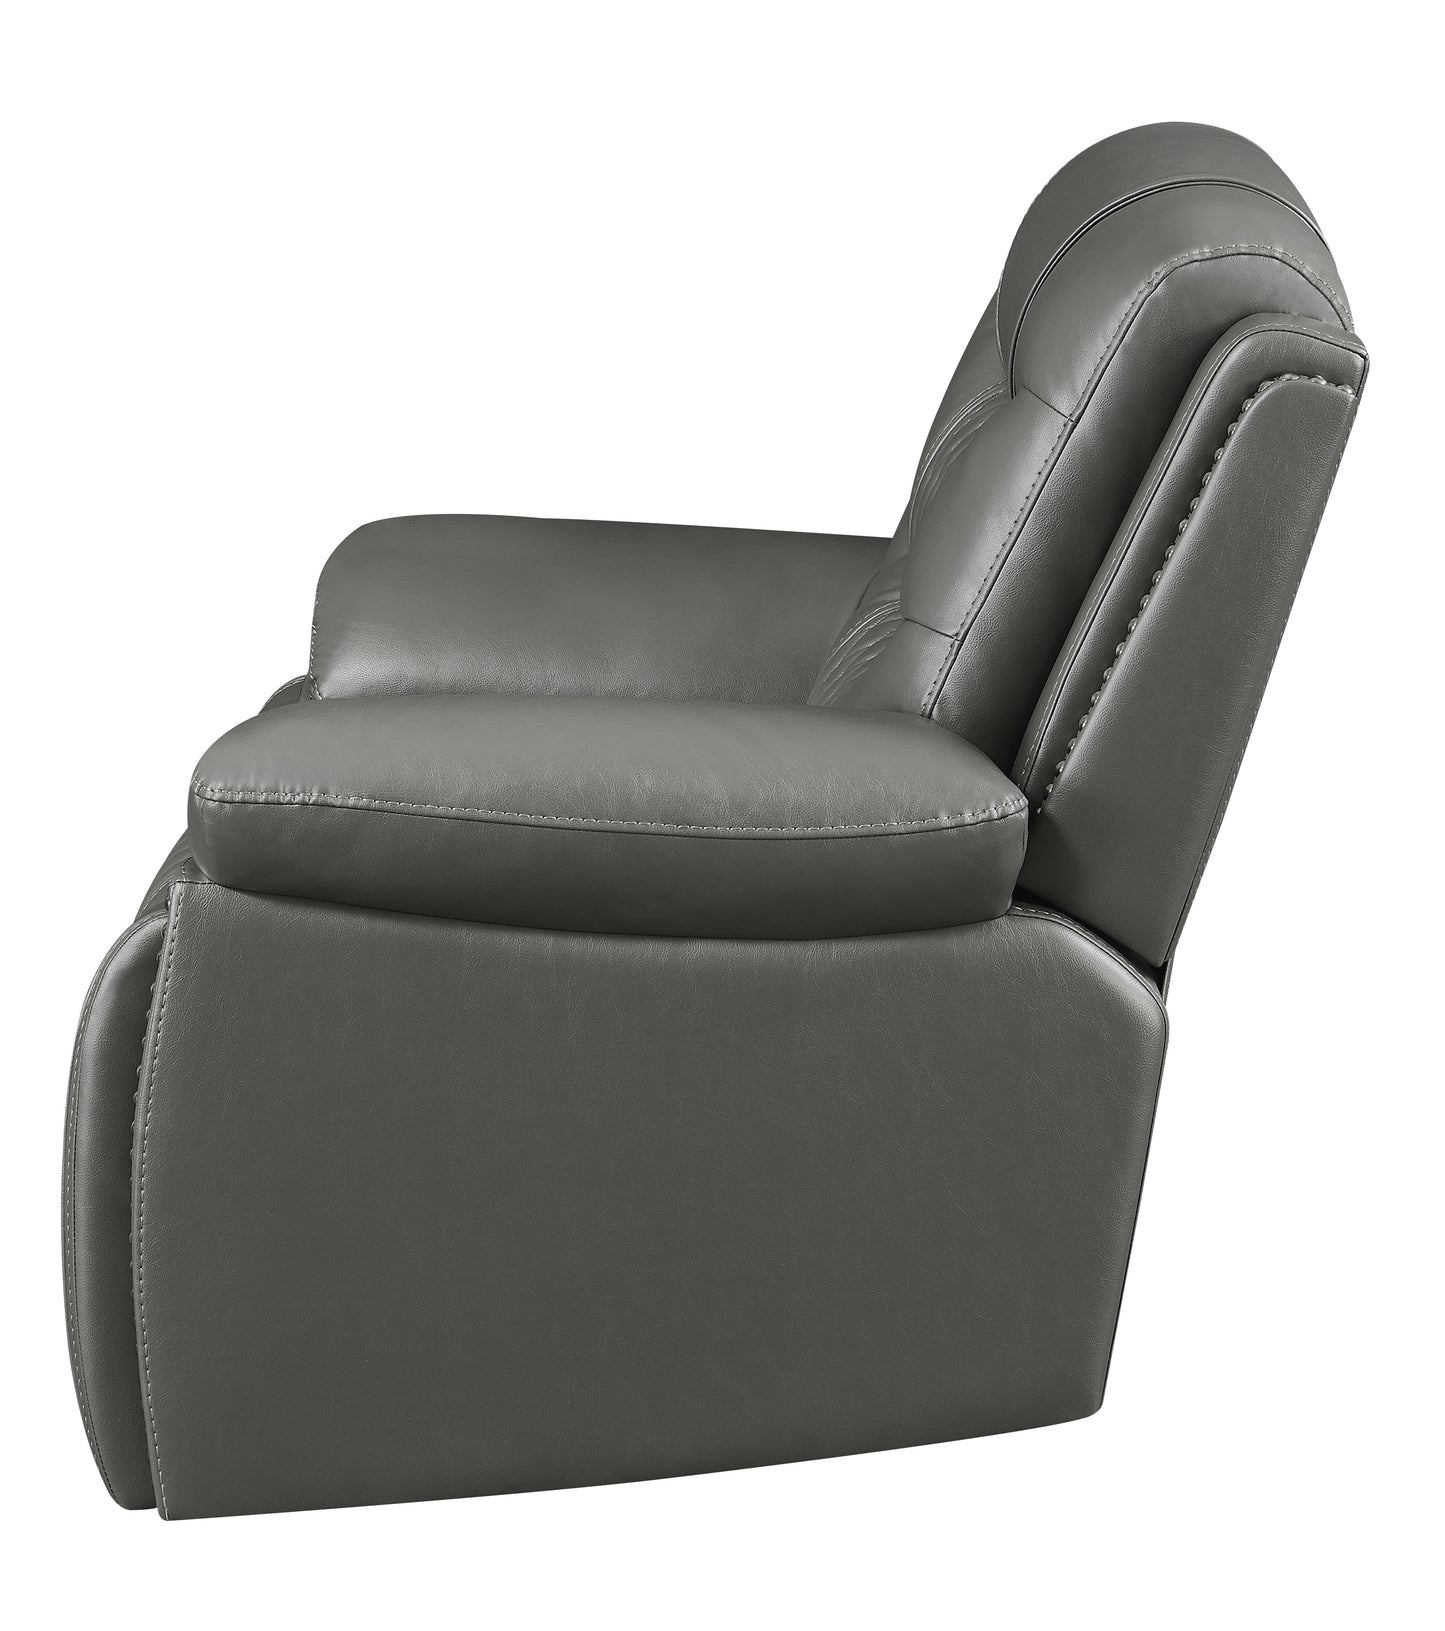 Flamenco Tufted Upholstered Recliner Charcoal